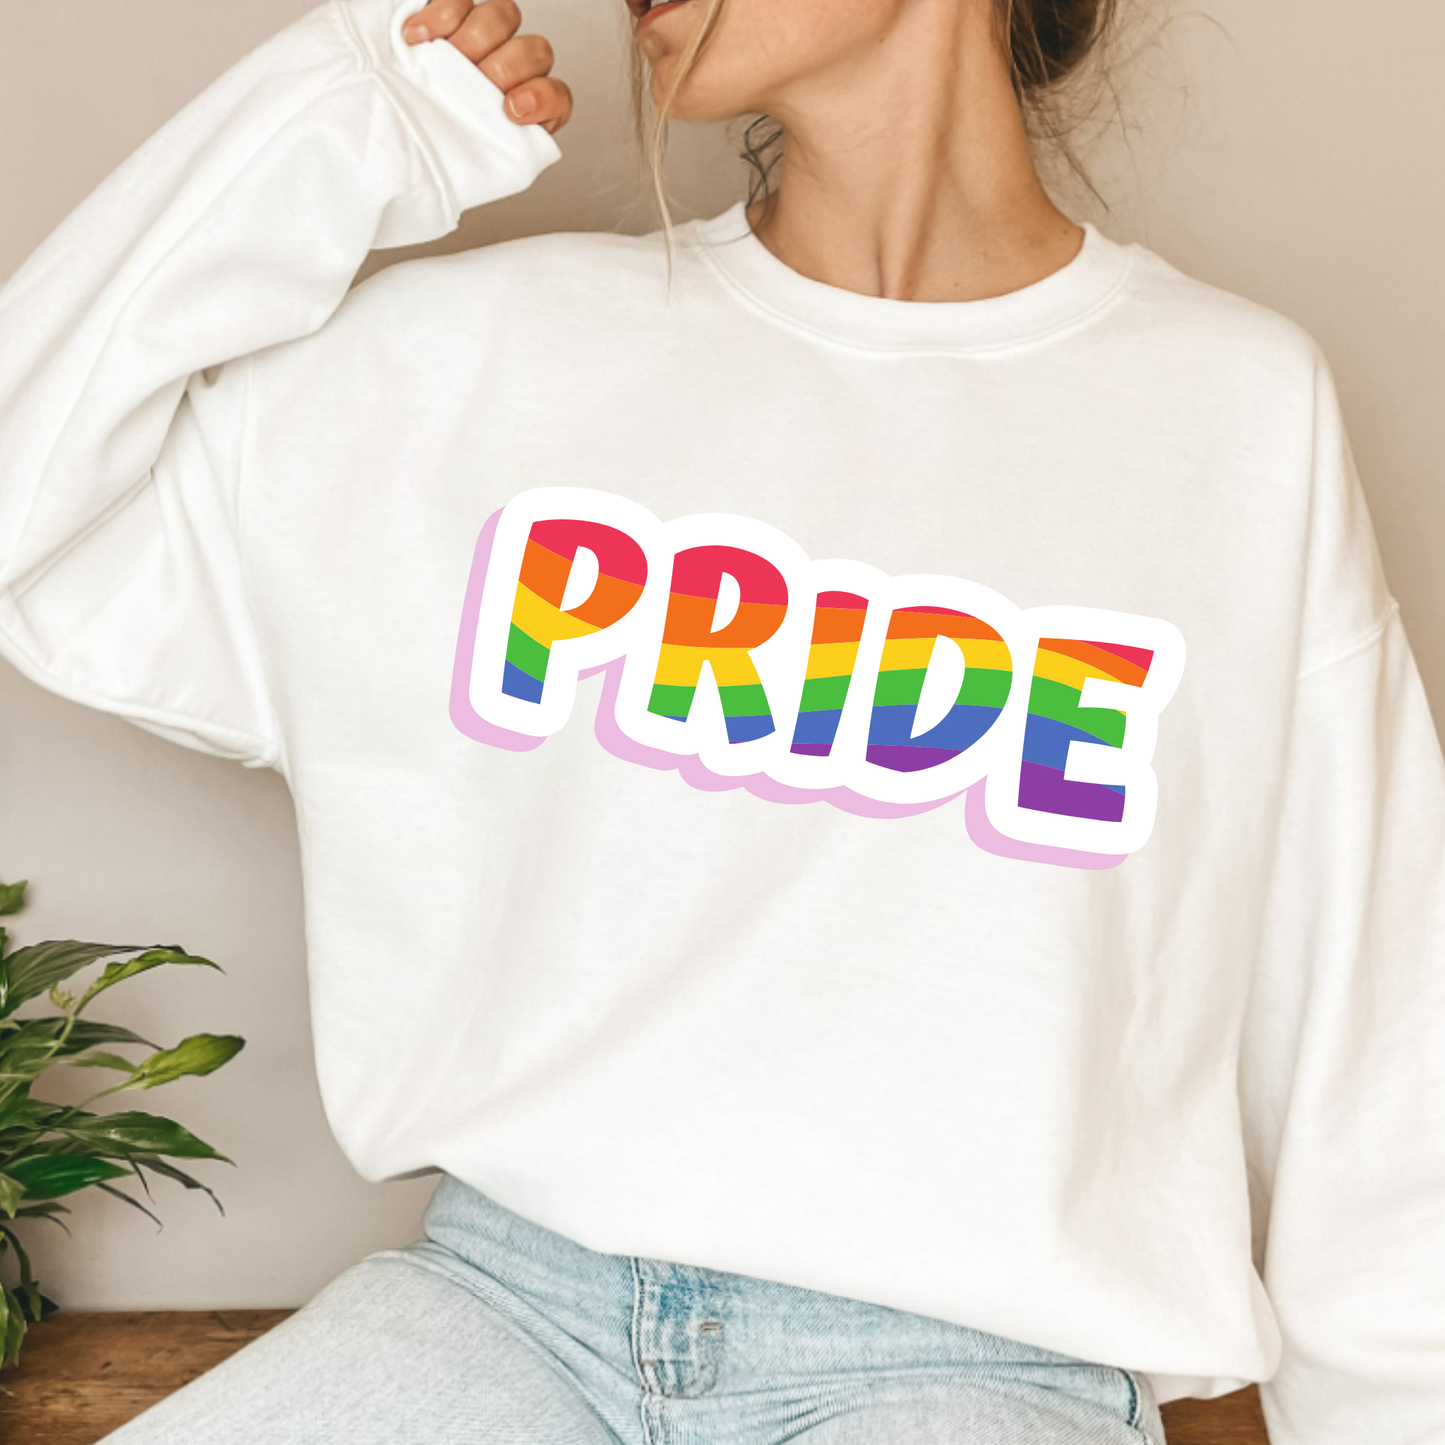 (Shirt not included) PRIDE + Sleeve detail - Clear Film Transfer